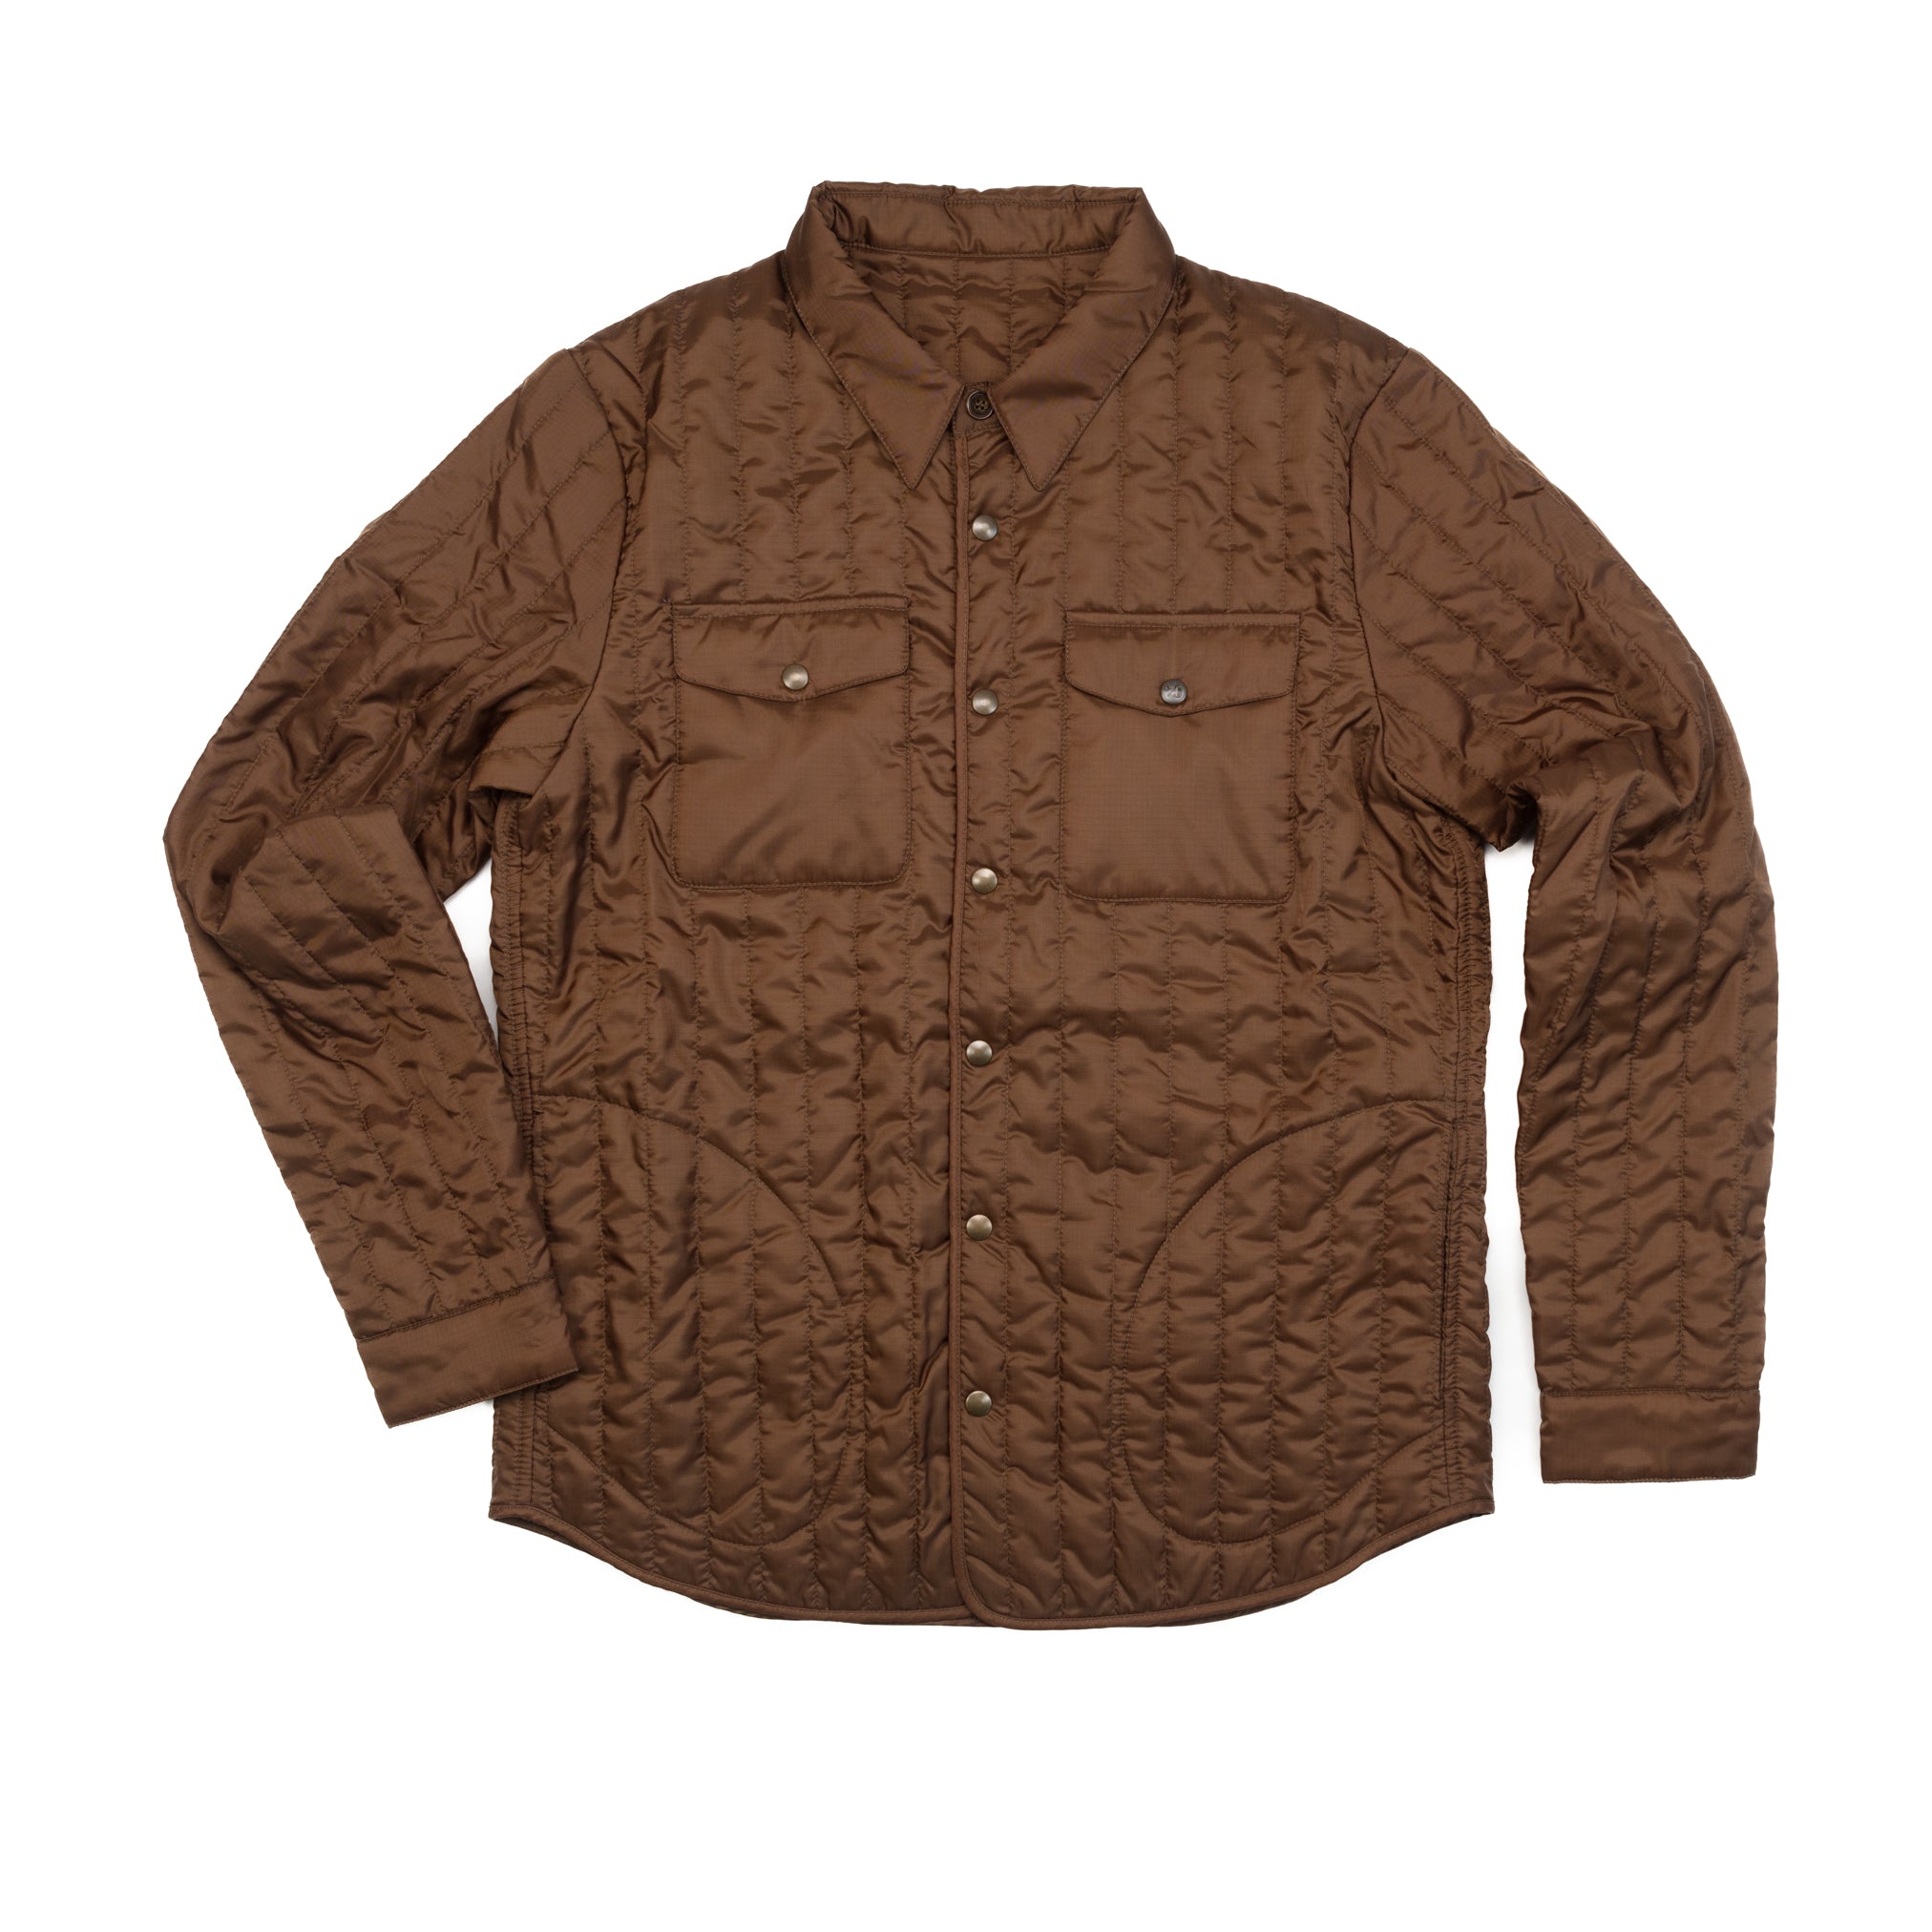 Microspin Shirt Jacket in Brown